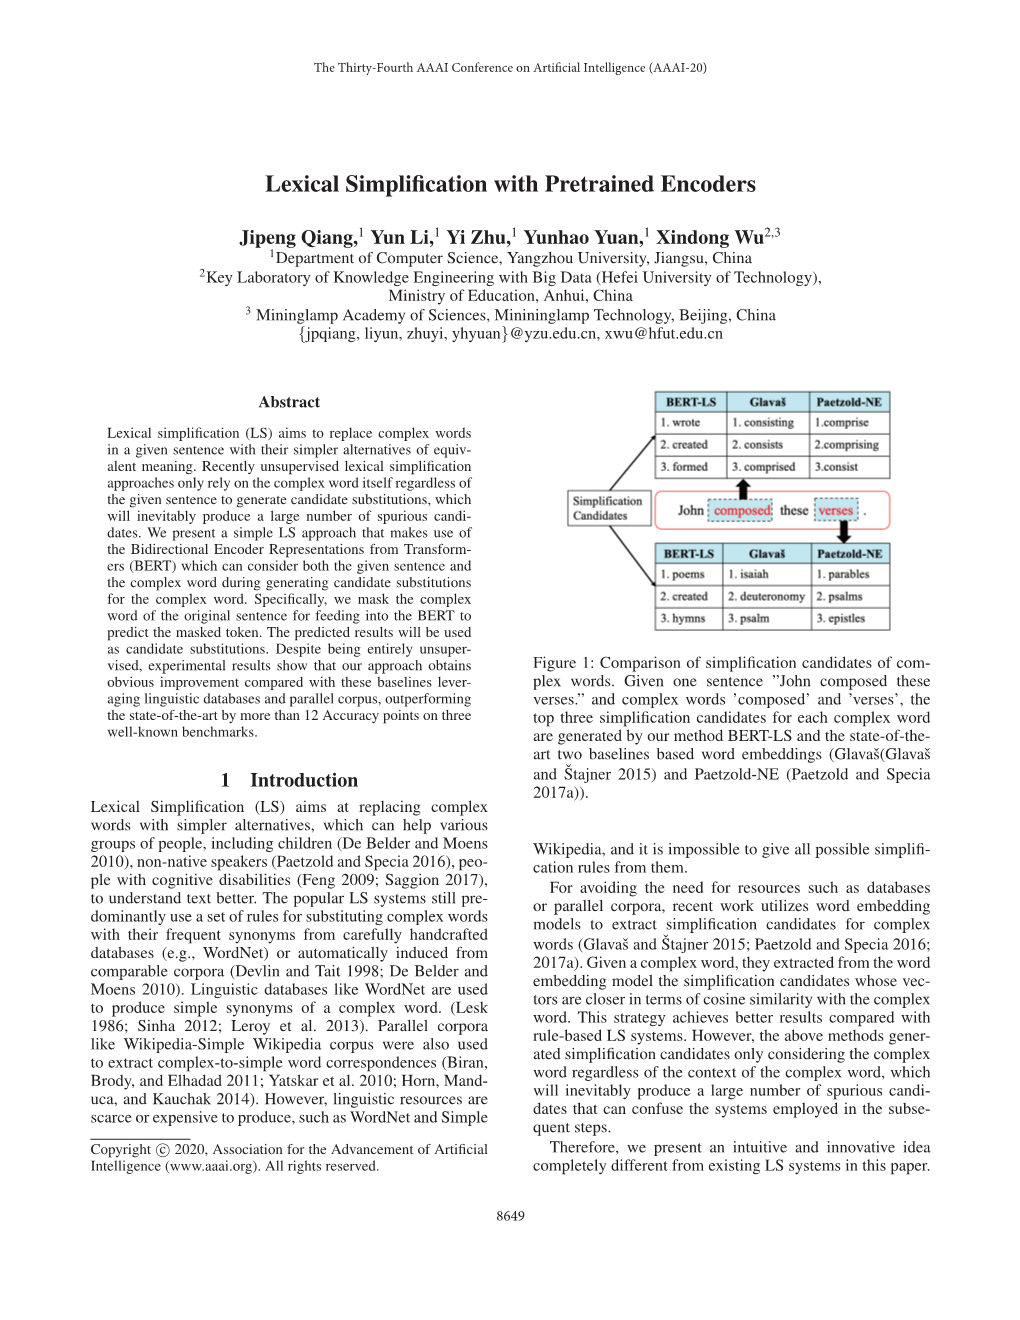 Lexical Simplification with Pretrained Encoders